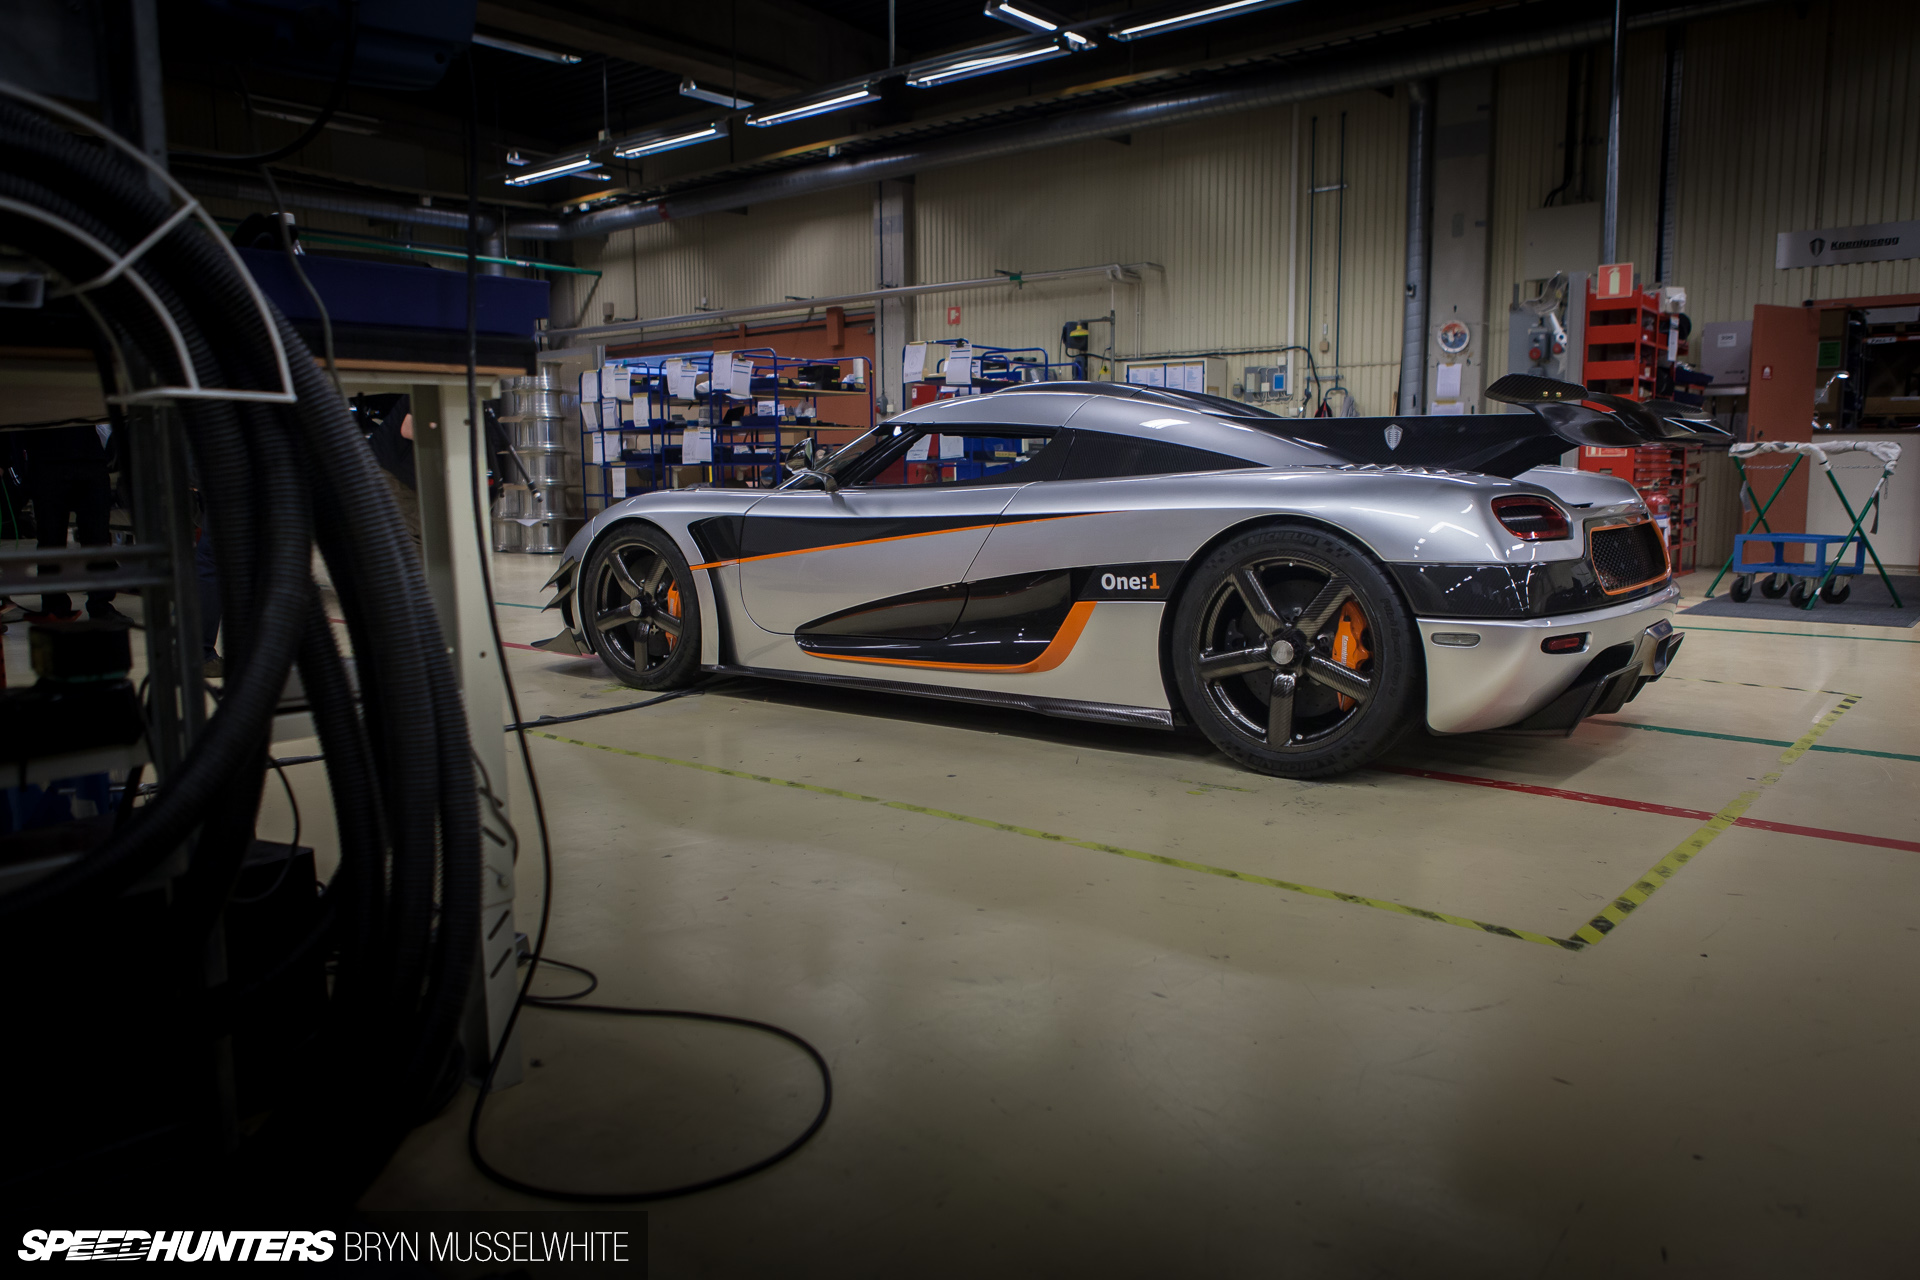 Koenigsegg - Have you seen the ghost on our cars? Here's